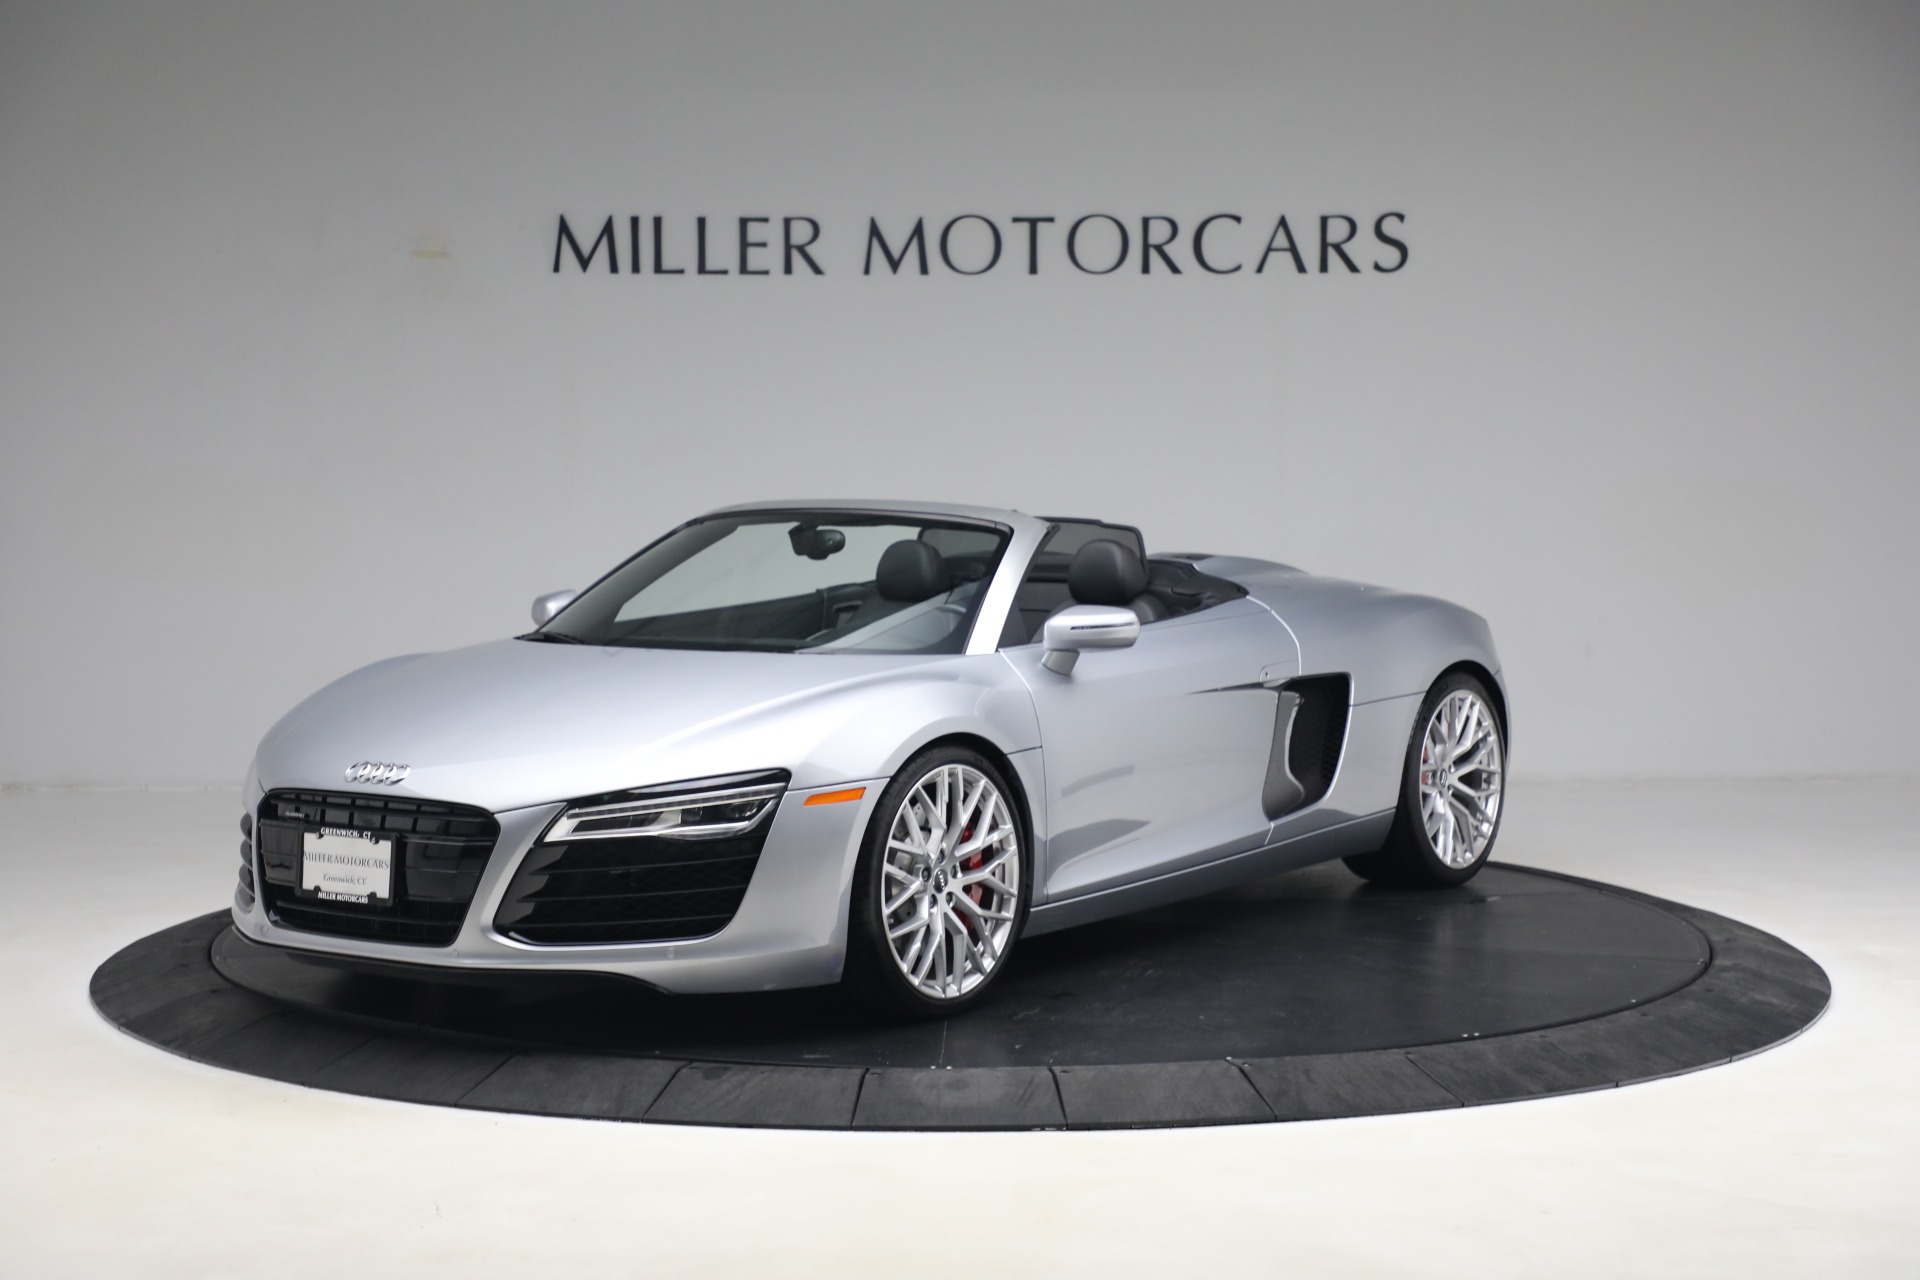 Used 2015 Audi R8 4.2 quattro Spyder for sale $149,900 at Aston Martin of Greenwich in Greenwich CT 06830 1